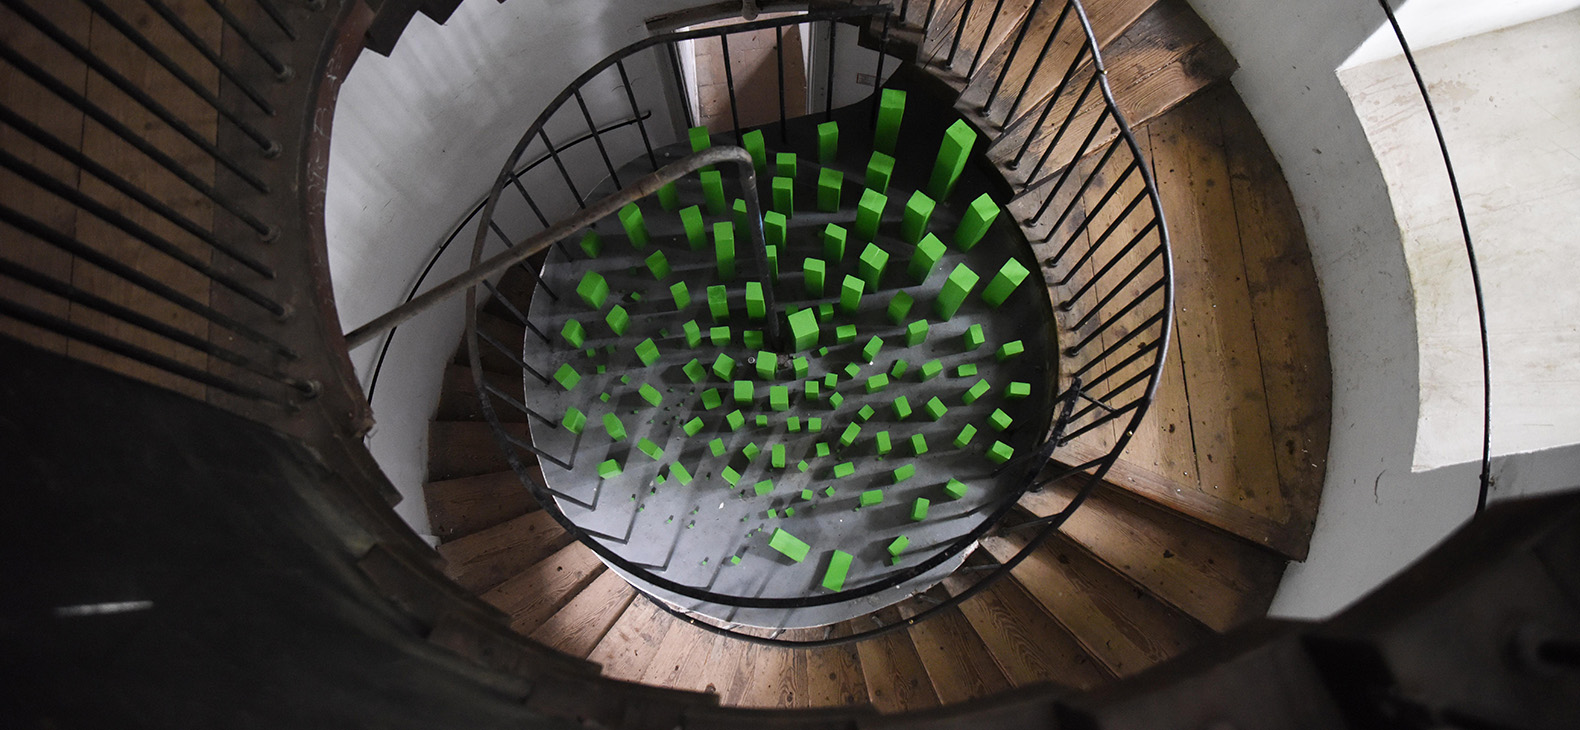 Schafhof Residency Programme; Artists 2023: Margit Greinöcker, picture: "Green City", installation made of green lacquered old wood on the floor of a round old building staircase as part of the exhibition TUERMEN, Linz 2022; bird's eye view photography in the staircase (photos: Ophelia Pauline Reuter).